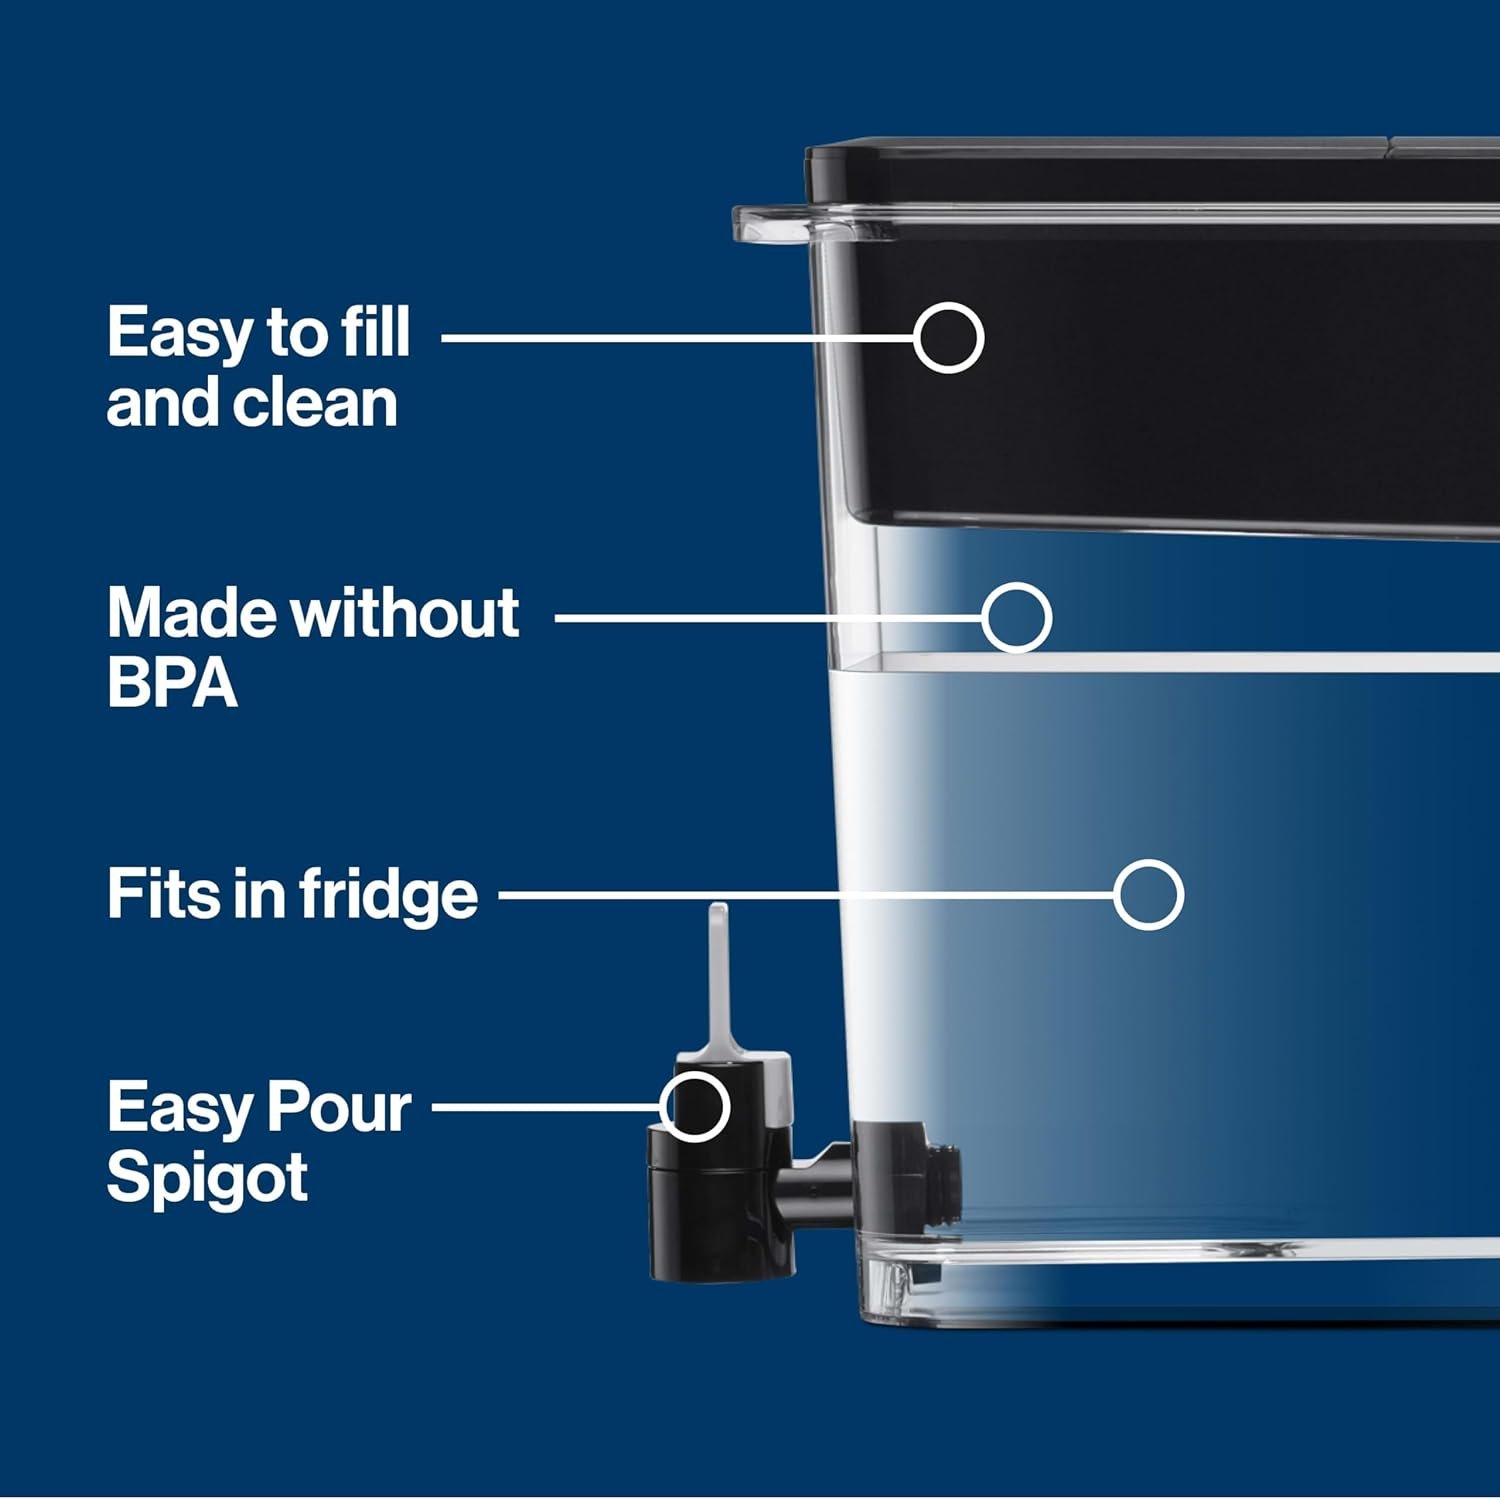 Brita XL Water Filter Dispenser for Tap and Drinking Water with 1 Elite Filter, Reduces 99% Of Lead, Lasts 6 Months, 27-Cup Capacity, Christmas Gift for Men and Women, BPA Free, Black